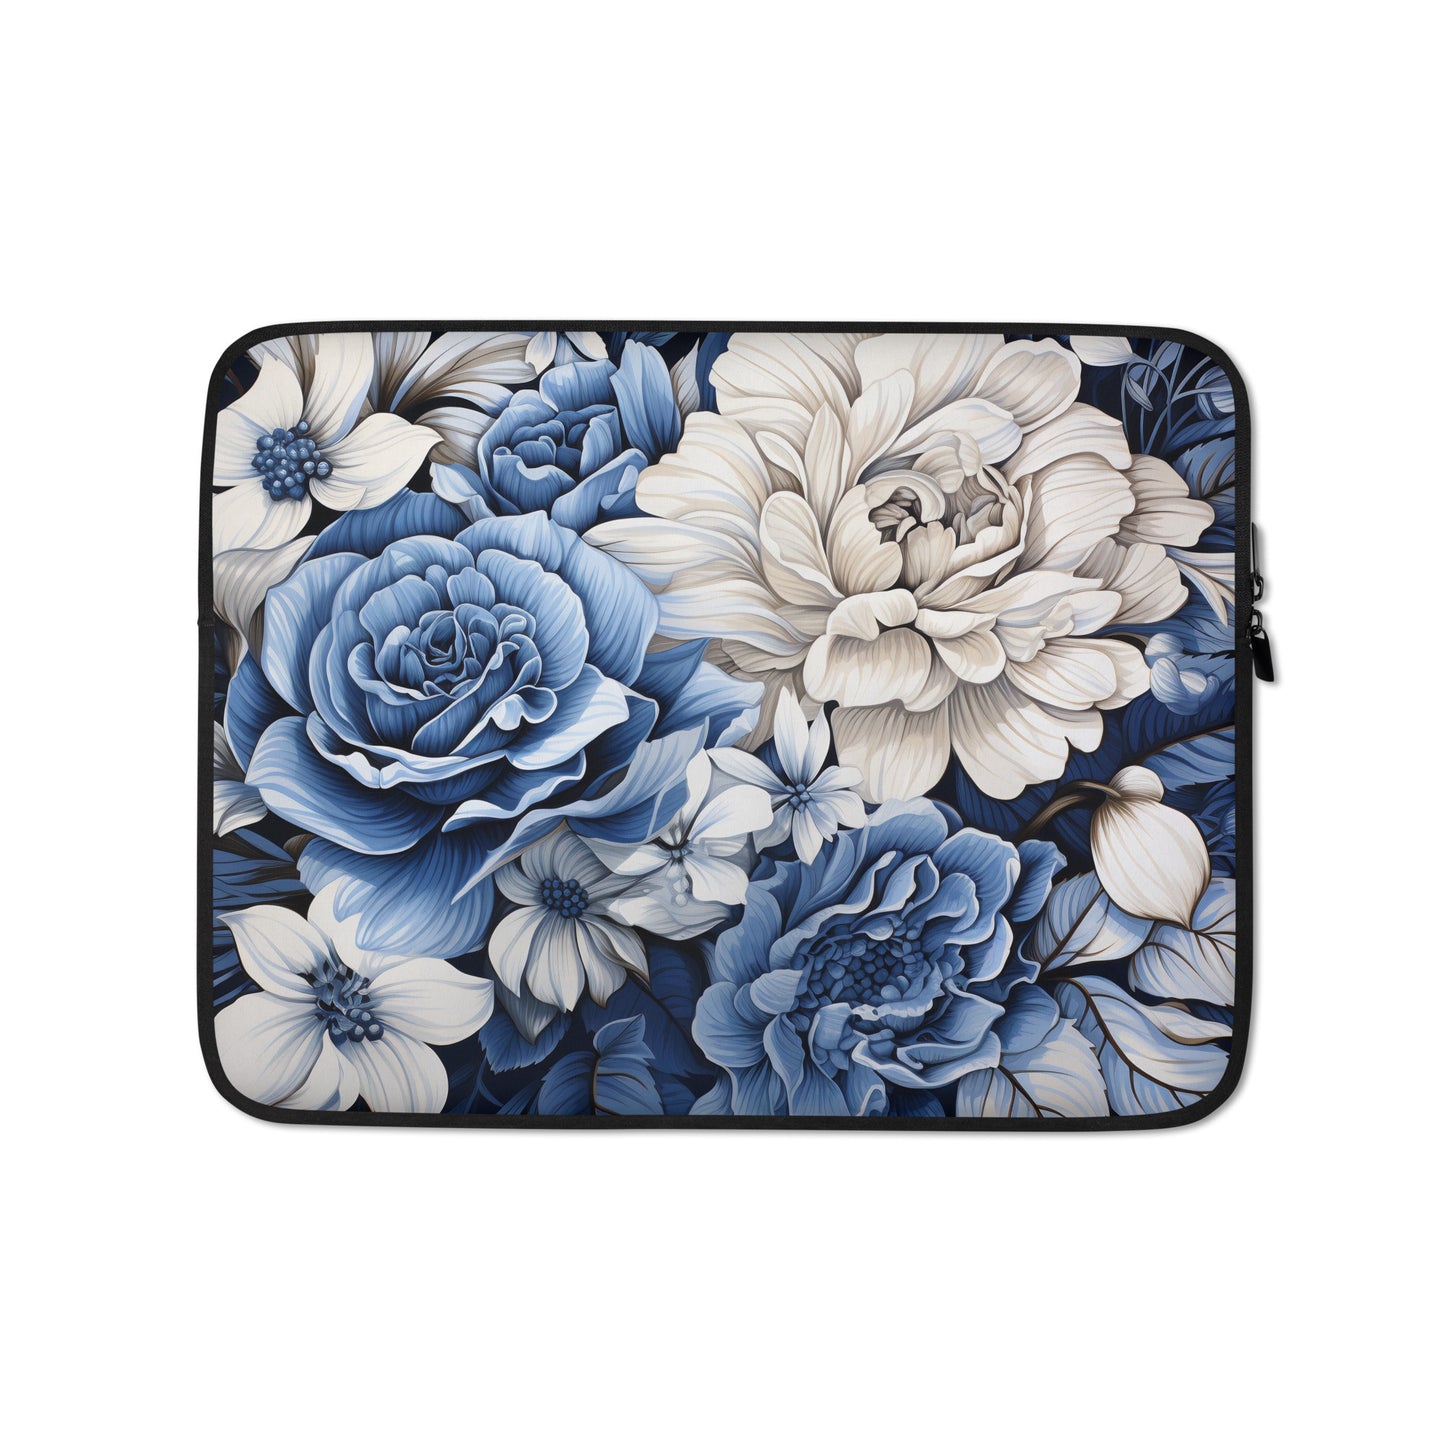 Royal Blue Roses in Bloom Laptop Sleeve CedarHill Country Market